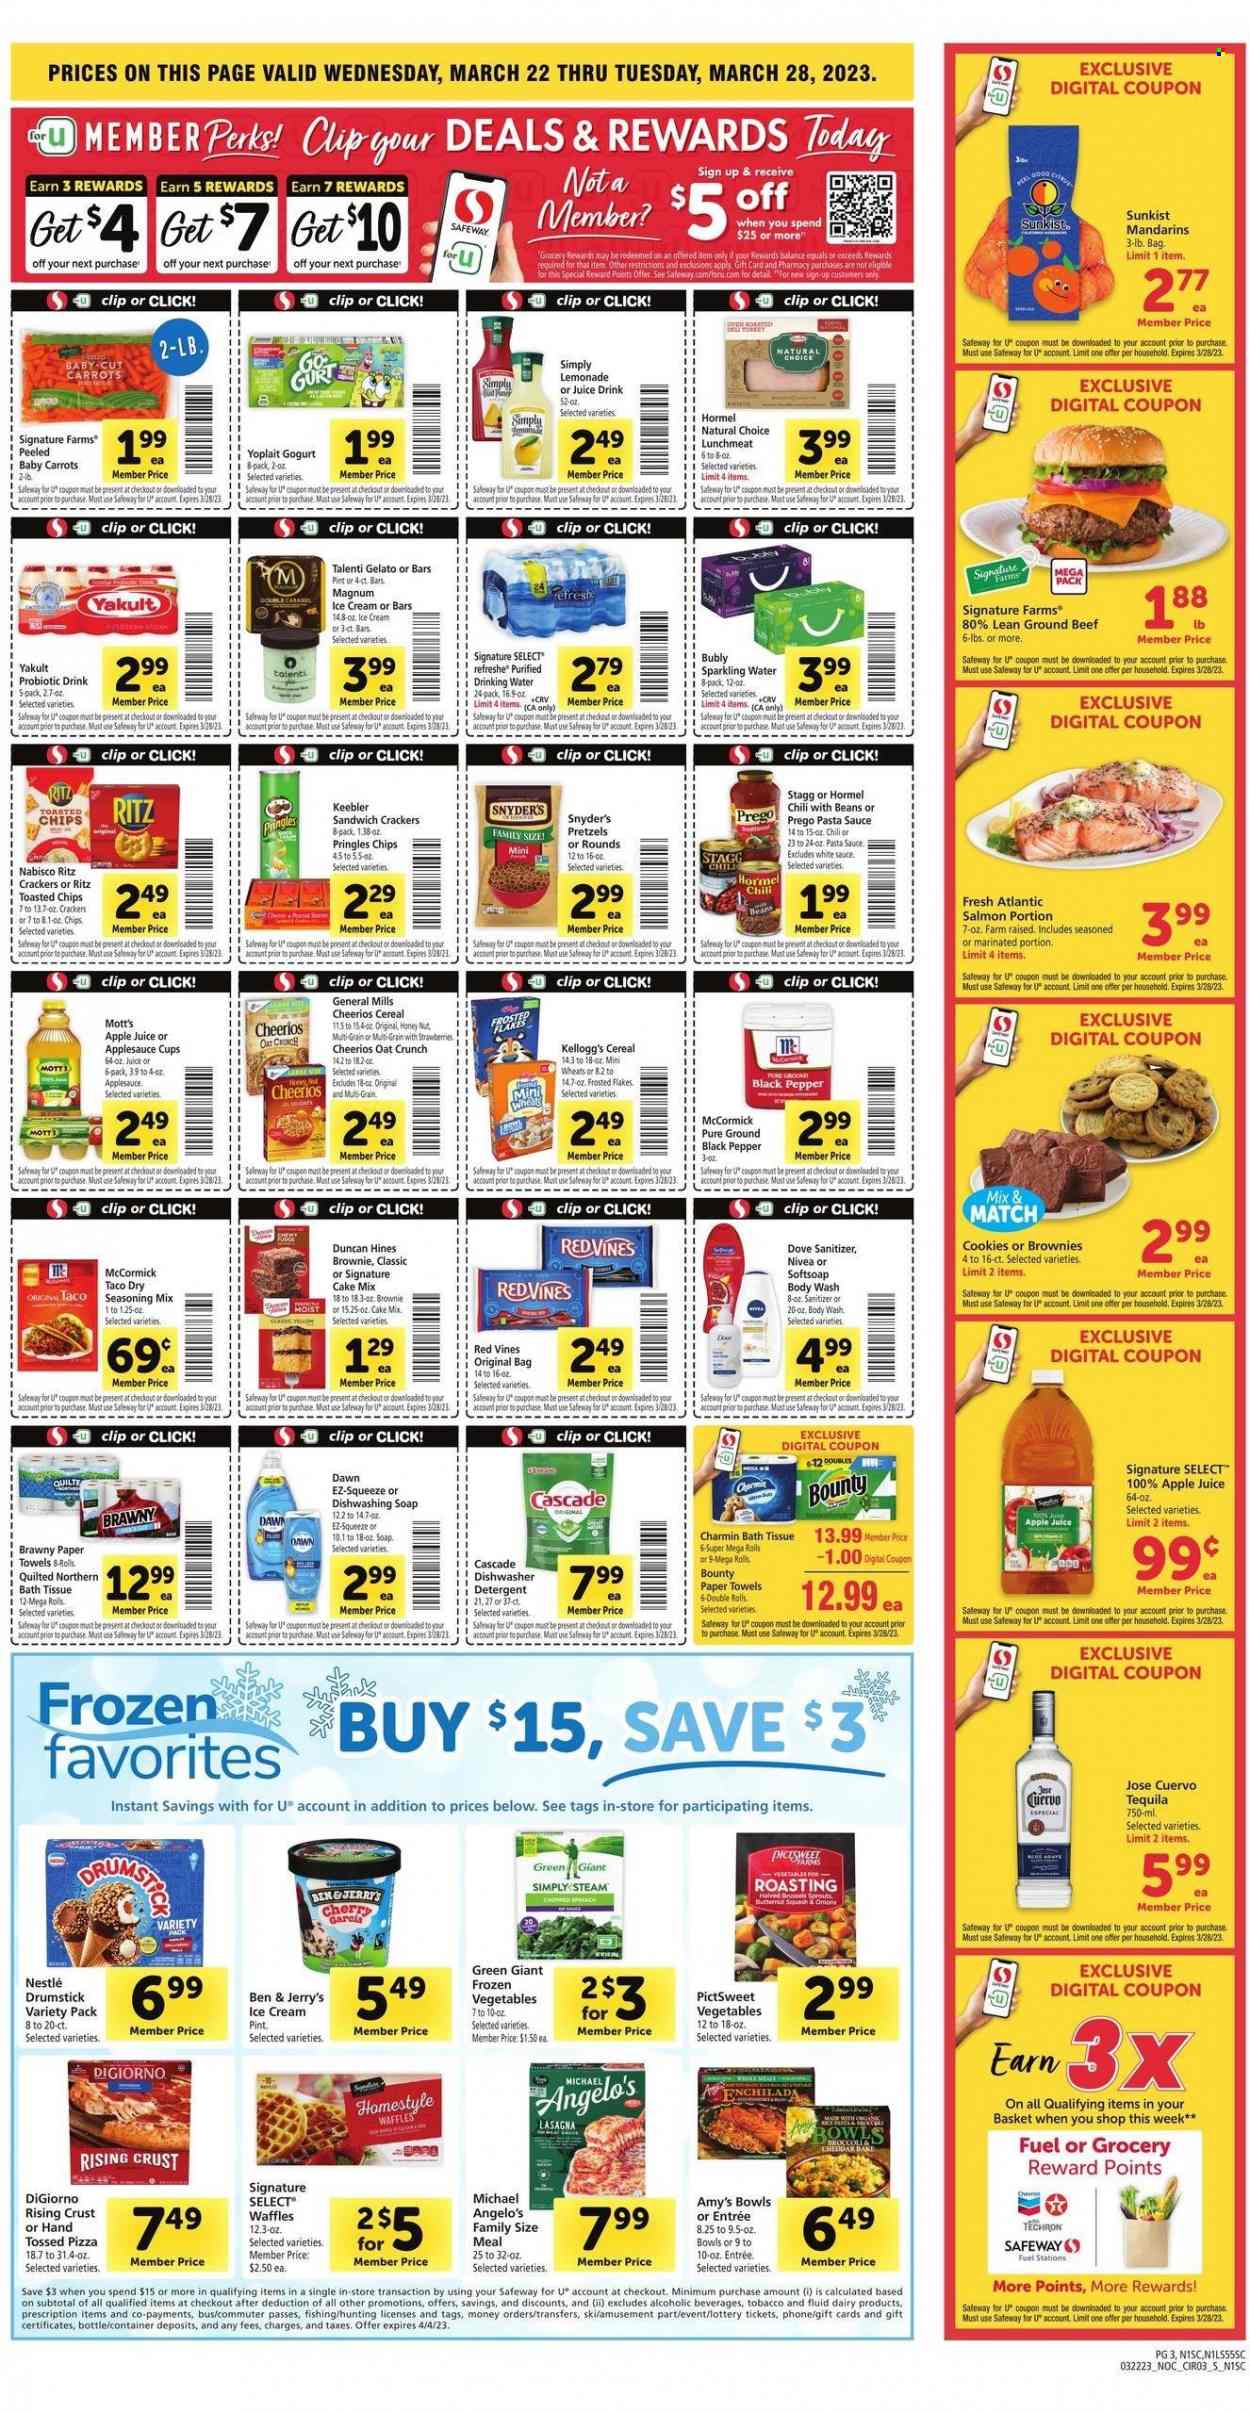 thumbnail - Safeway Flyer - 03/22/2023 - 03/28/2023 - Sales products - pretzels, waffles, carrots, mandarines, Mott's, beef meat, ground beef, salmon, enchiladas, pizza, pasta sauce, lasagna meal, Hormel, lunch meat, Yoplait, ice cream, Ben & Jerry's, Talenti Gelato, gelato, frozen vegetables, cookies, Dove, Nestlé, Bounty, crackers, Kellogg's, Keebler, RITZ, Pringles, oats, cereals, Cheerios, Frosted Flakes, black pepper, spice, apple sauce, apple juice, lemonade, juice, sparkling water, water, tequila, bath tissue, Quilted Northern, kitchen towels, paper towels, Charmin, detergent, Gain, Cascade, body wash, Softsoap, Nivea, soap, cup, container. Page 3.